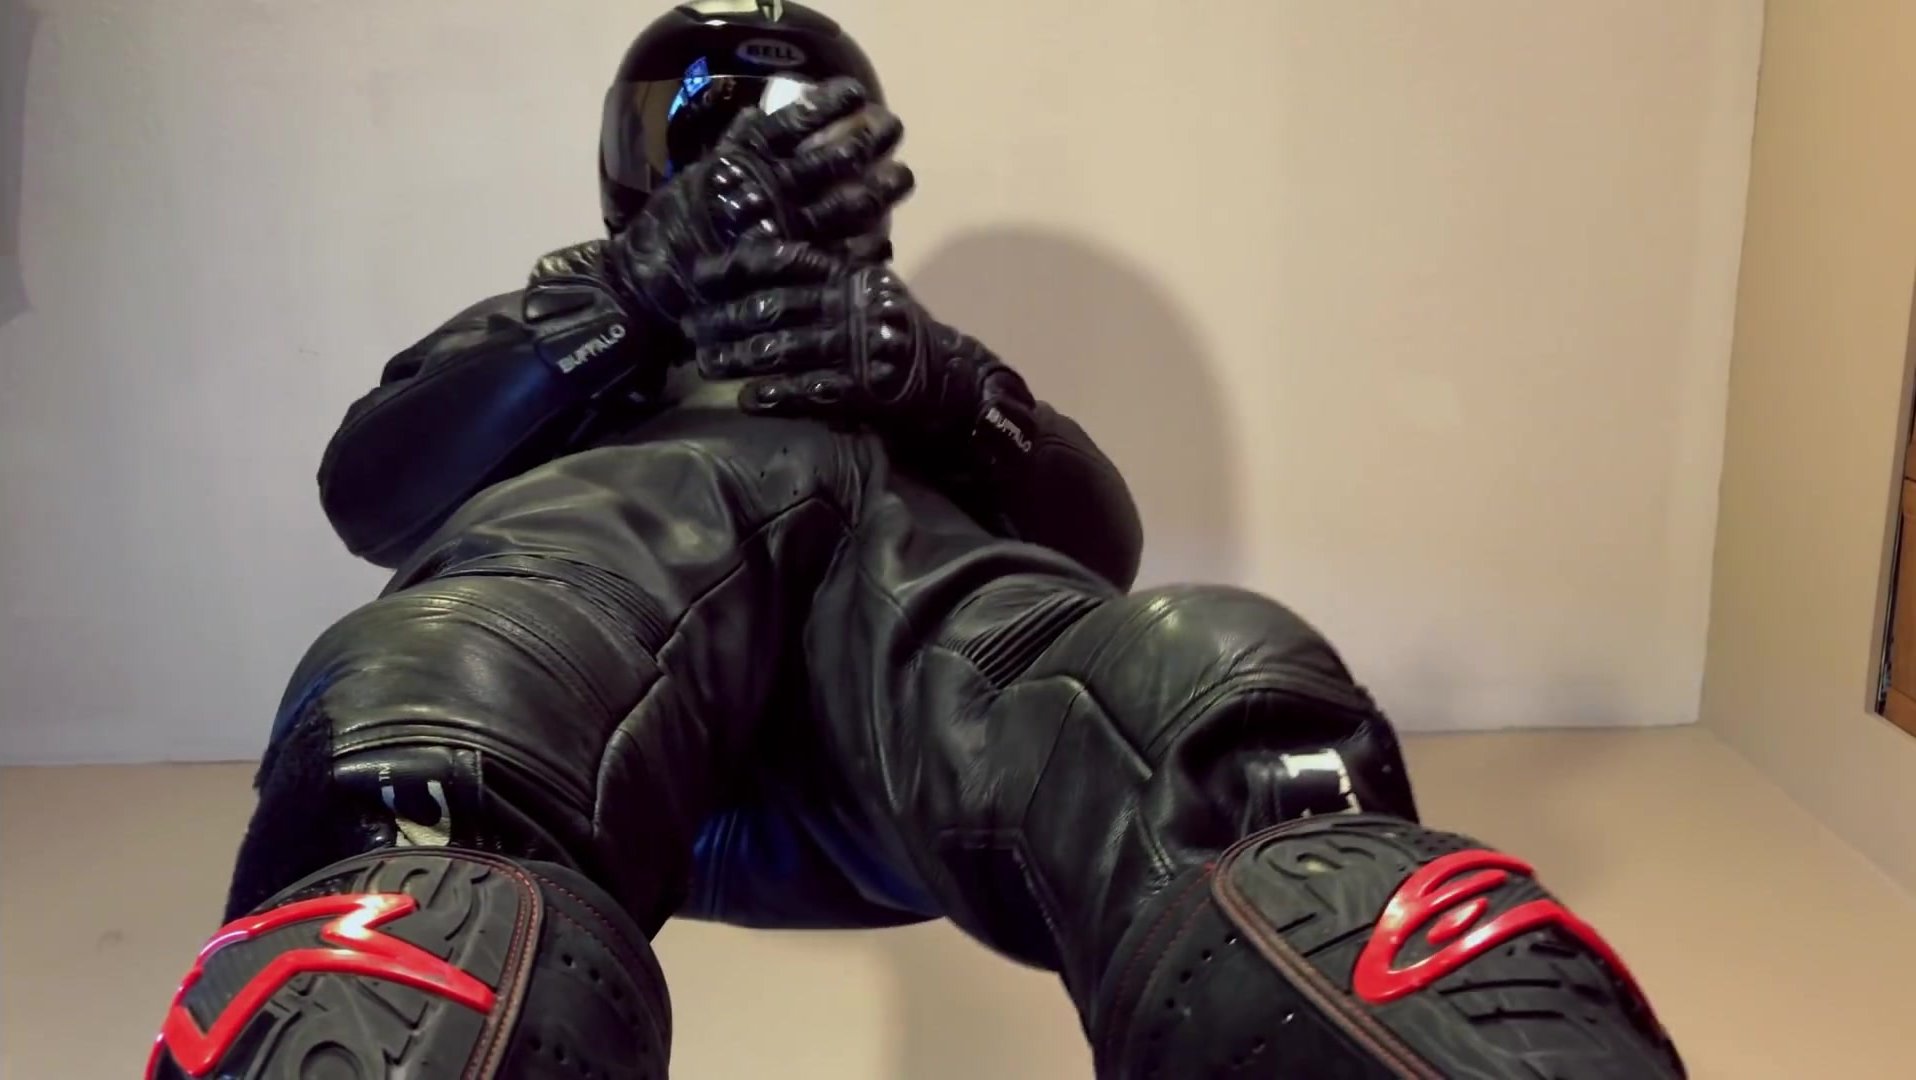 Giant teases tiny with big biker boots